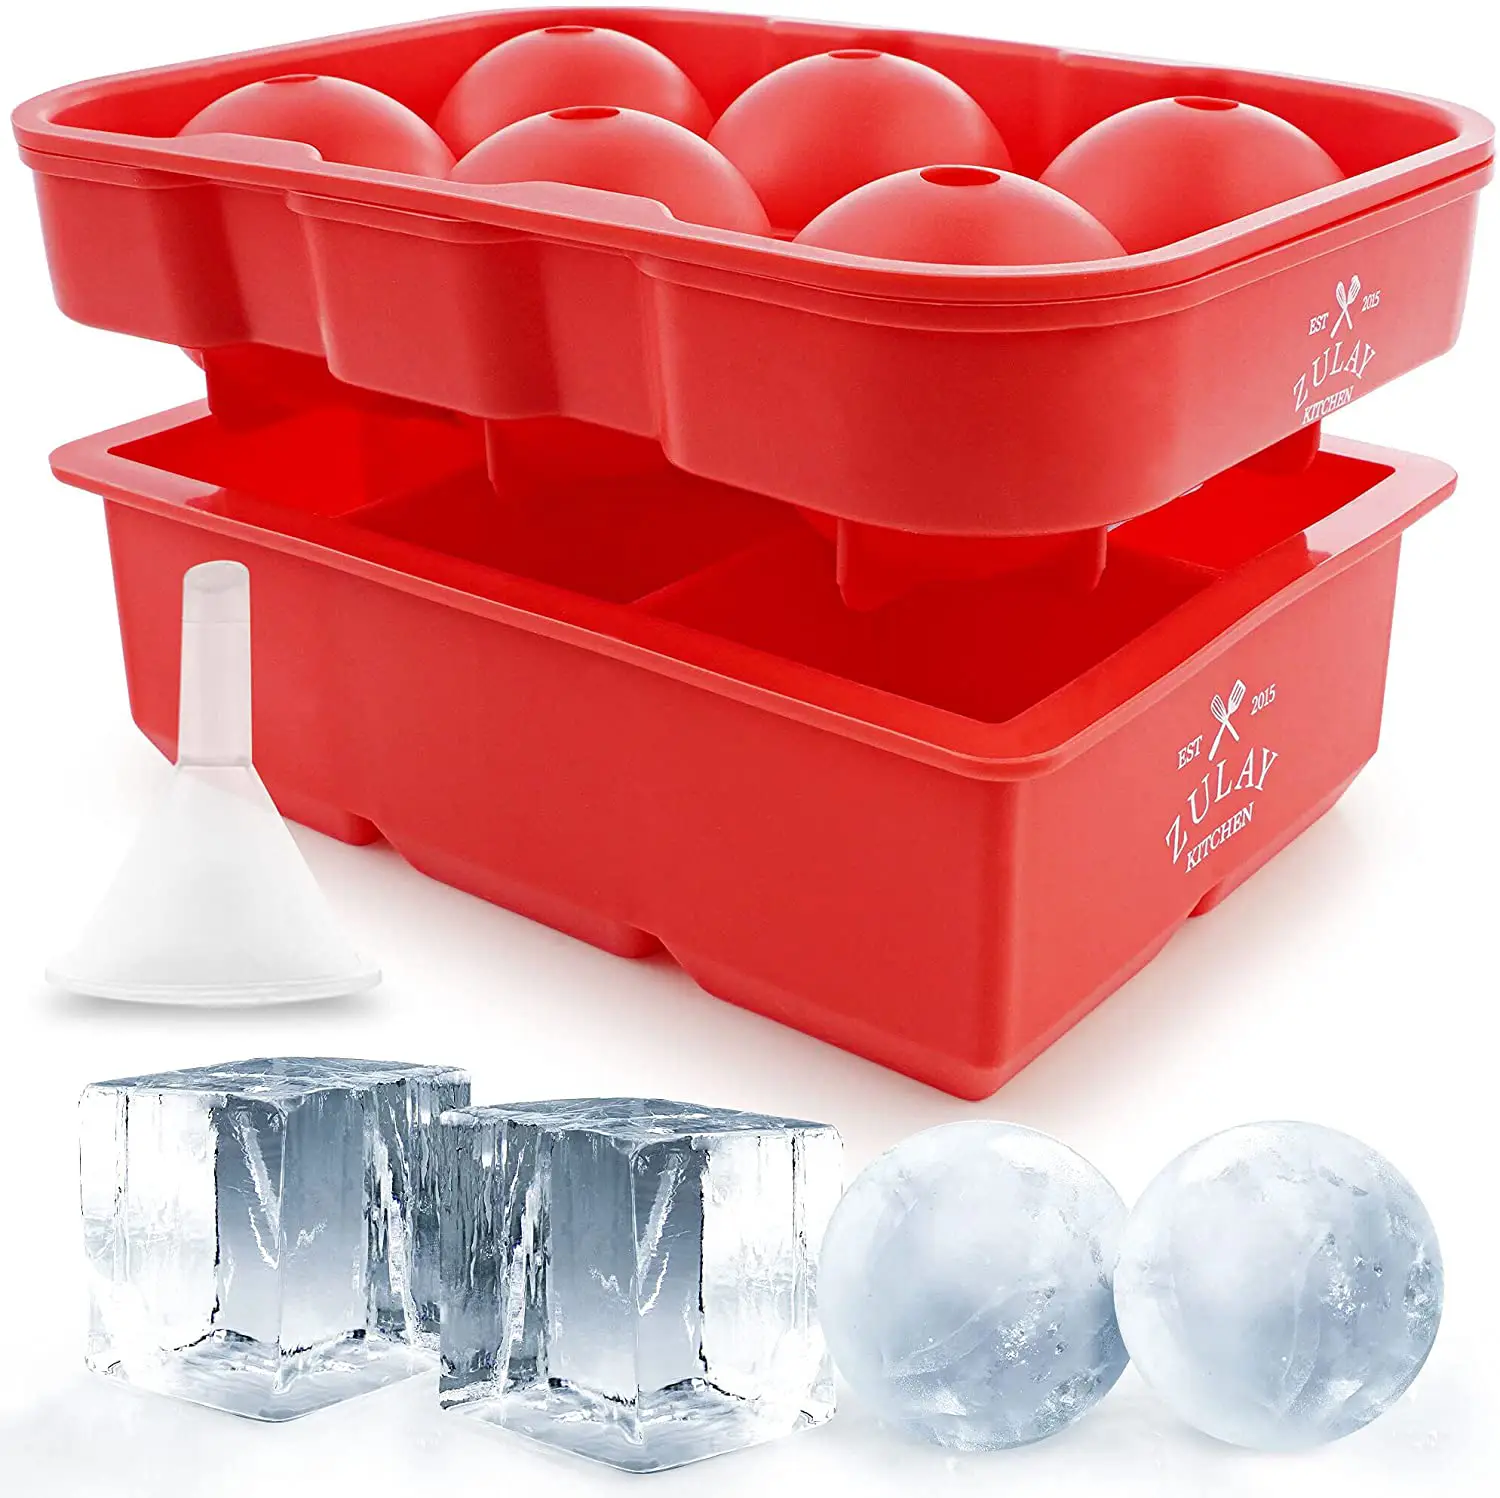 Silicone Square Ice Cube Mold and Ice Ball Mold (Set of 2)